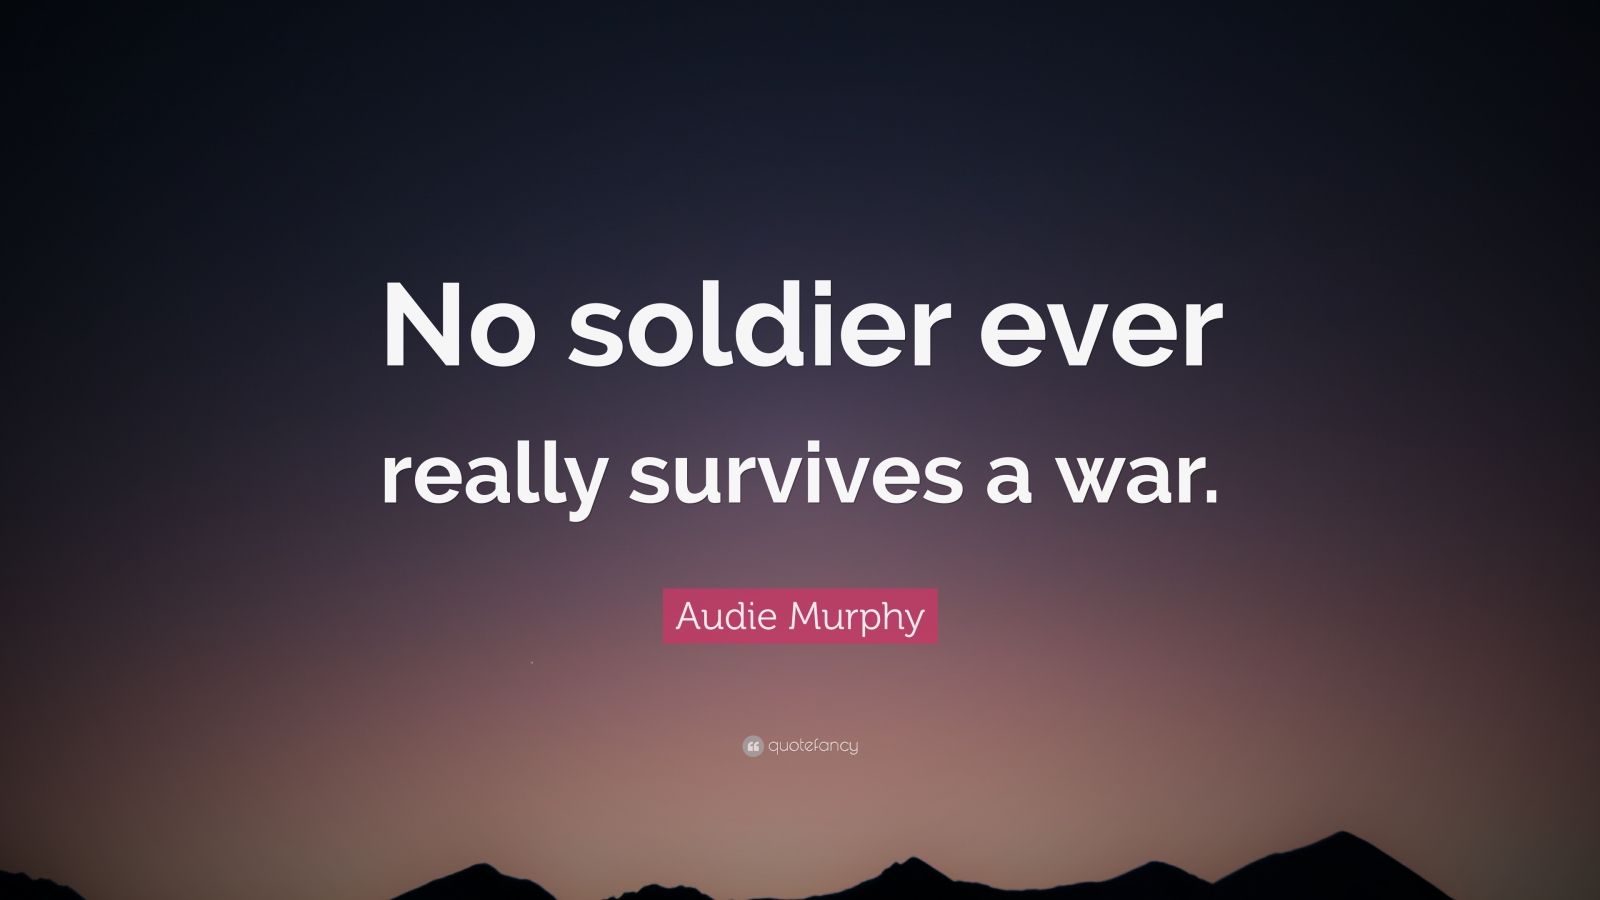 Audie Murphy Quote: “No soldier ever really survives a war.” (7 ...